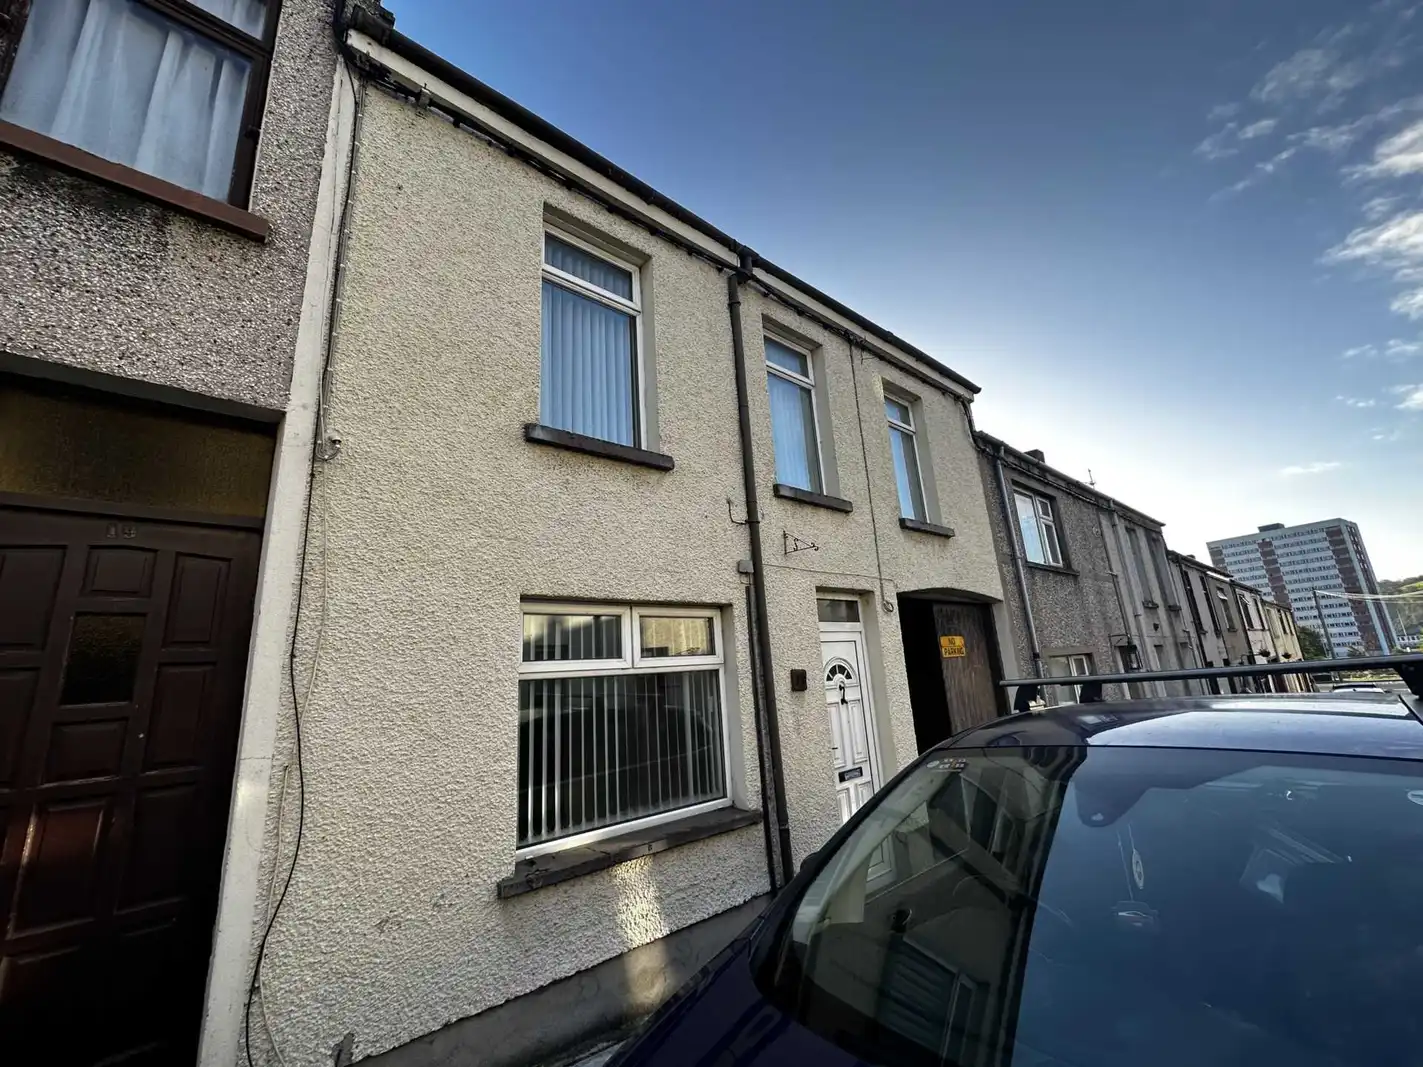 17 Gardenmore Place, Larne